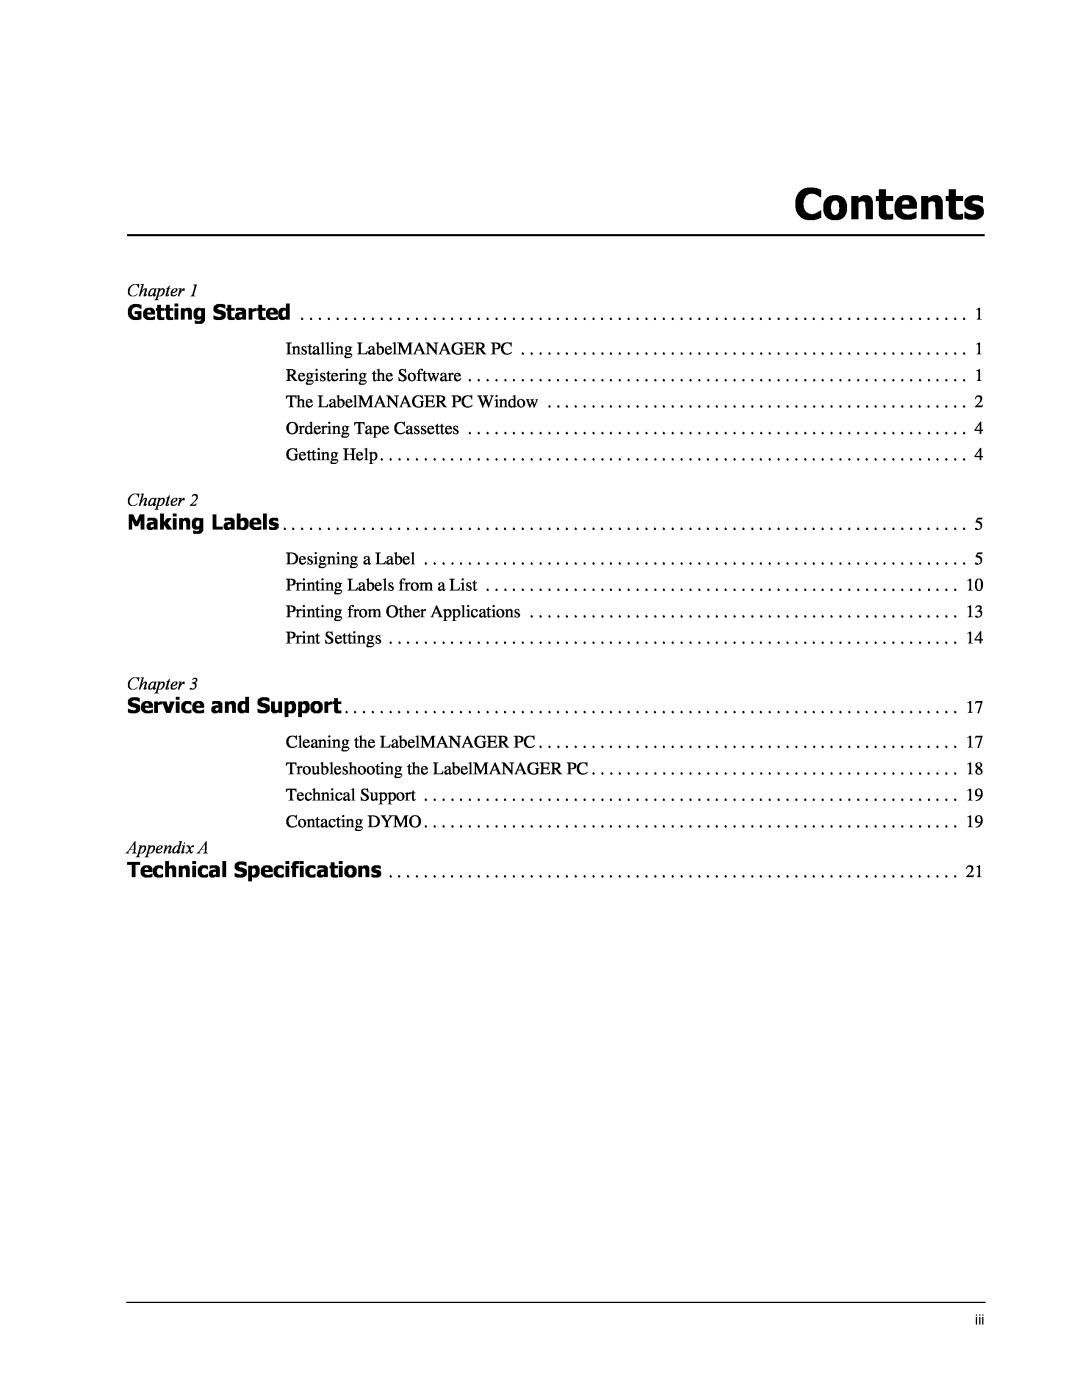 Dymo Label Manager PC manual Contents, Chapter, Appendix A 